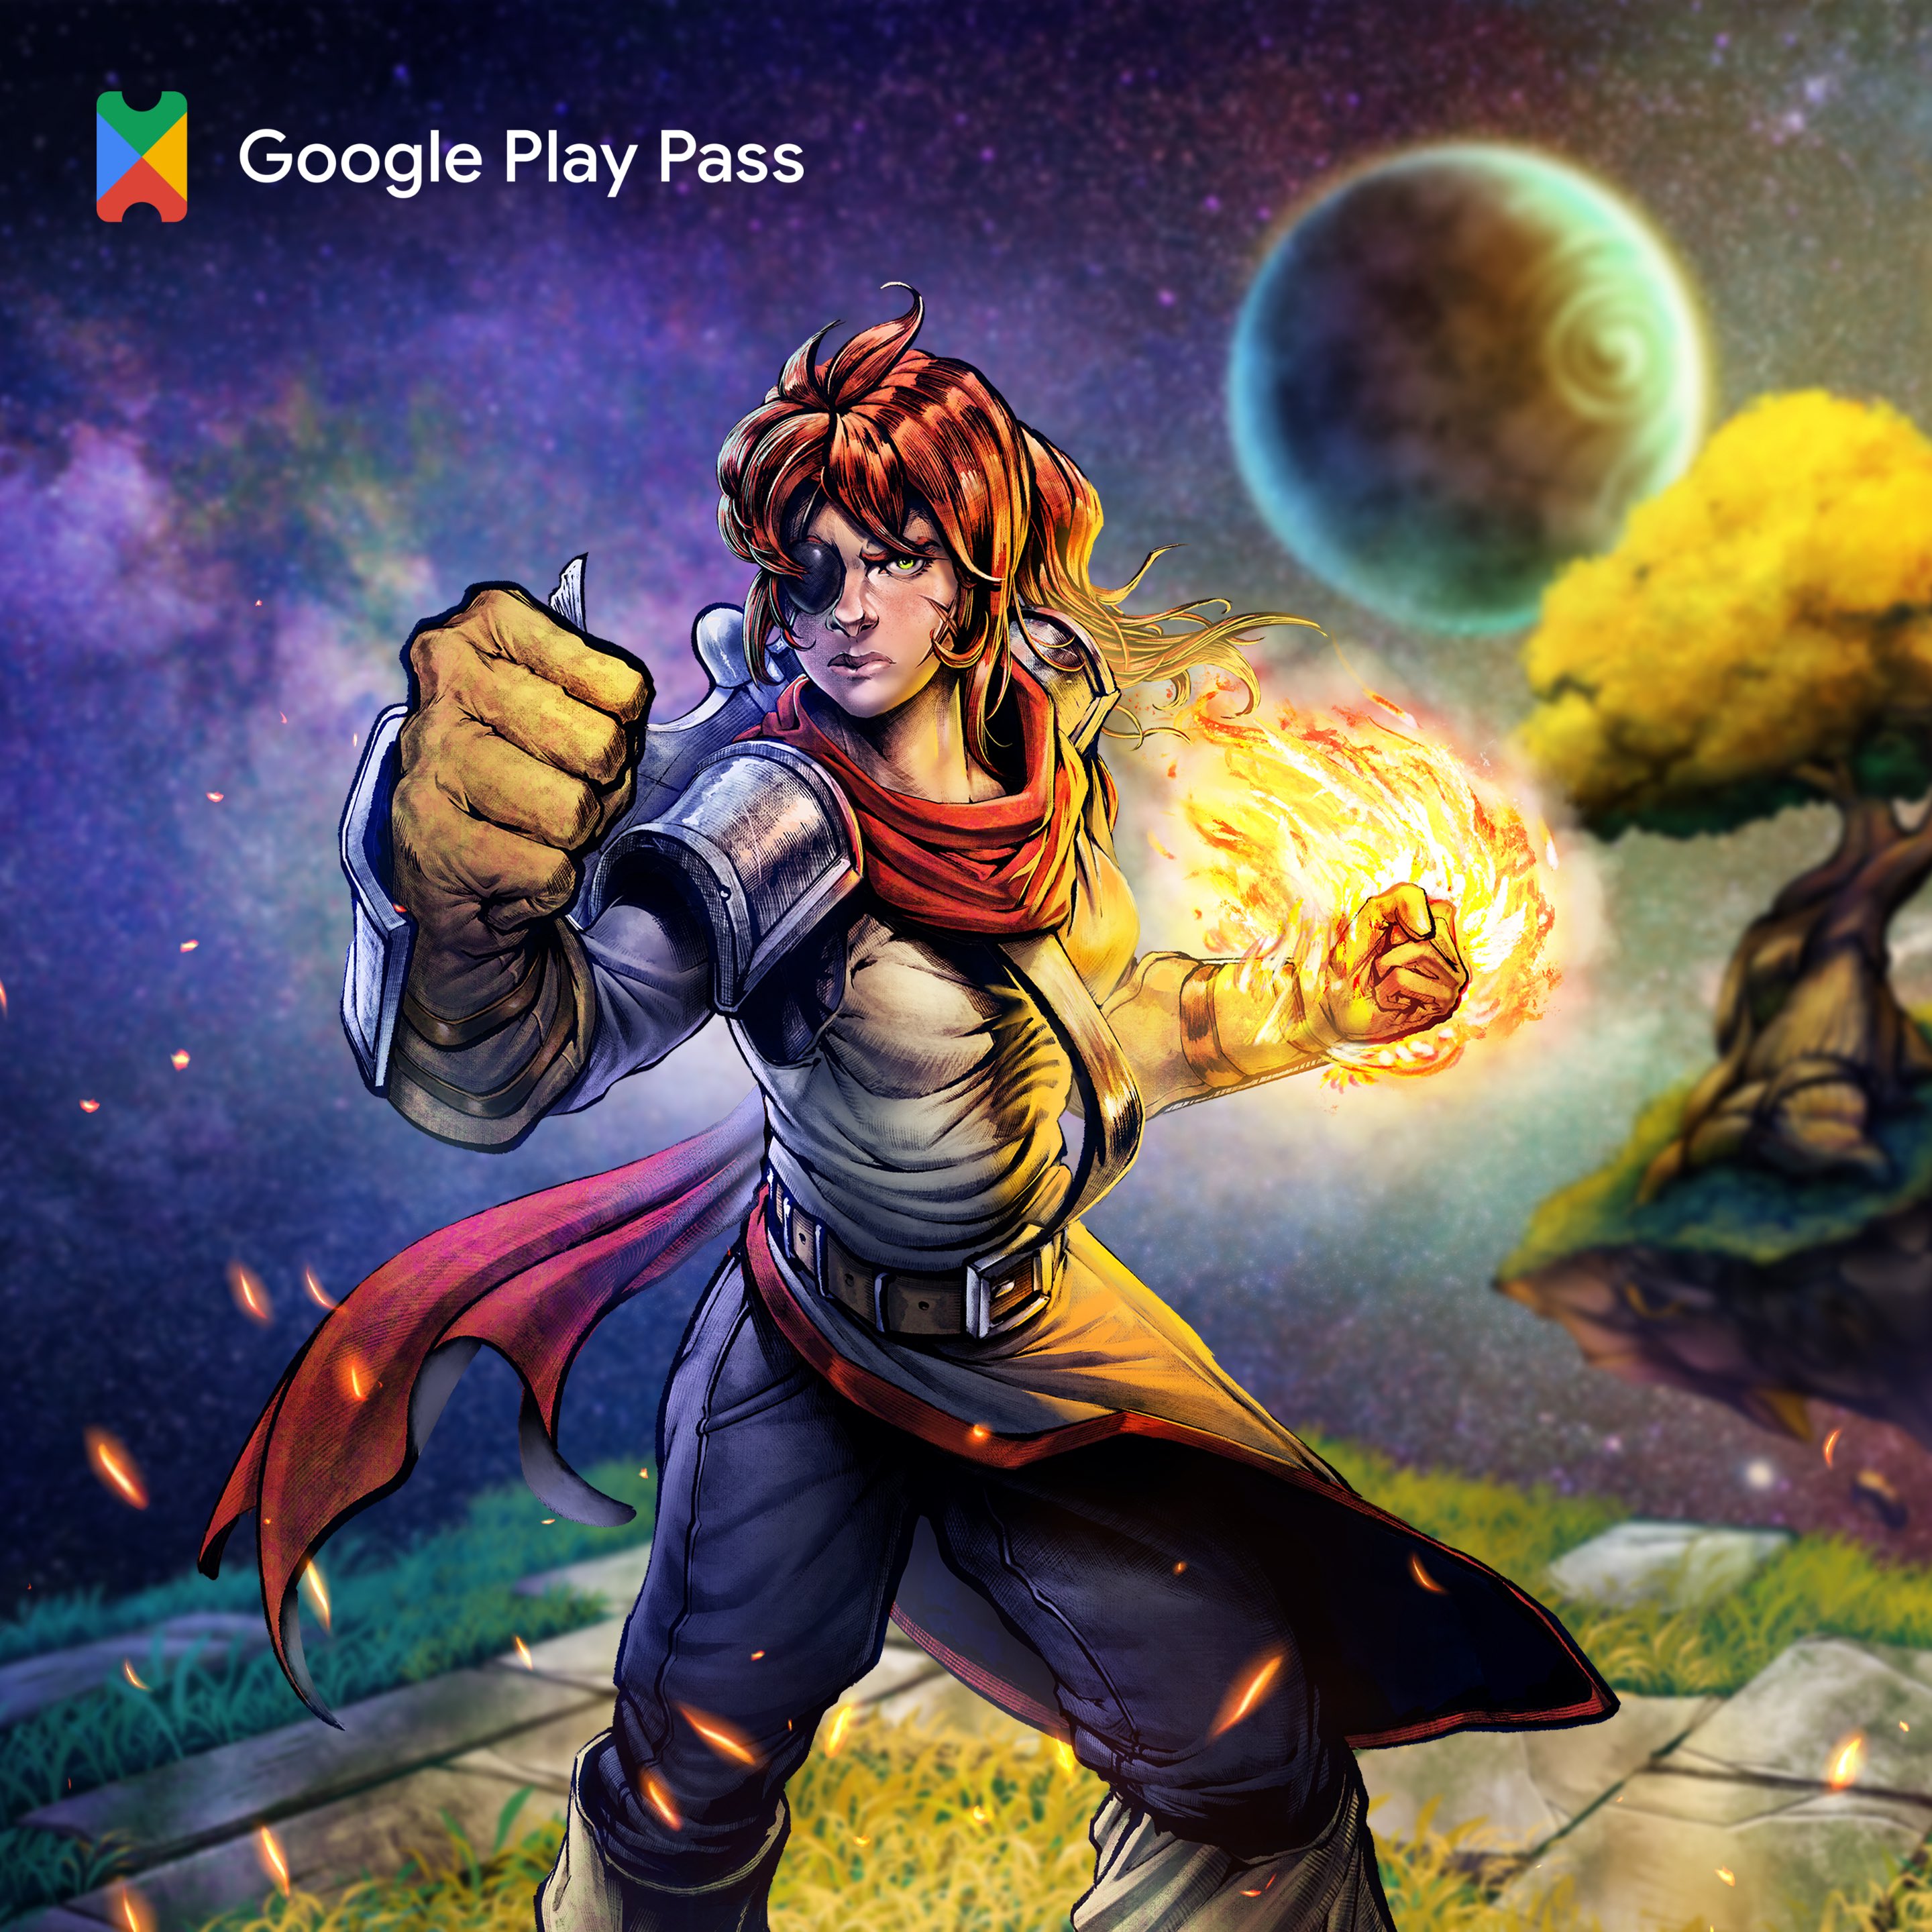 Magic Rampage - Apps on Google Play